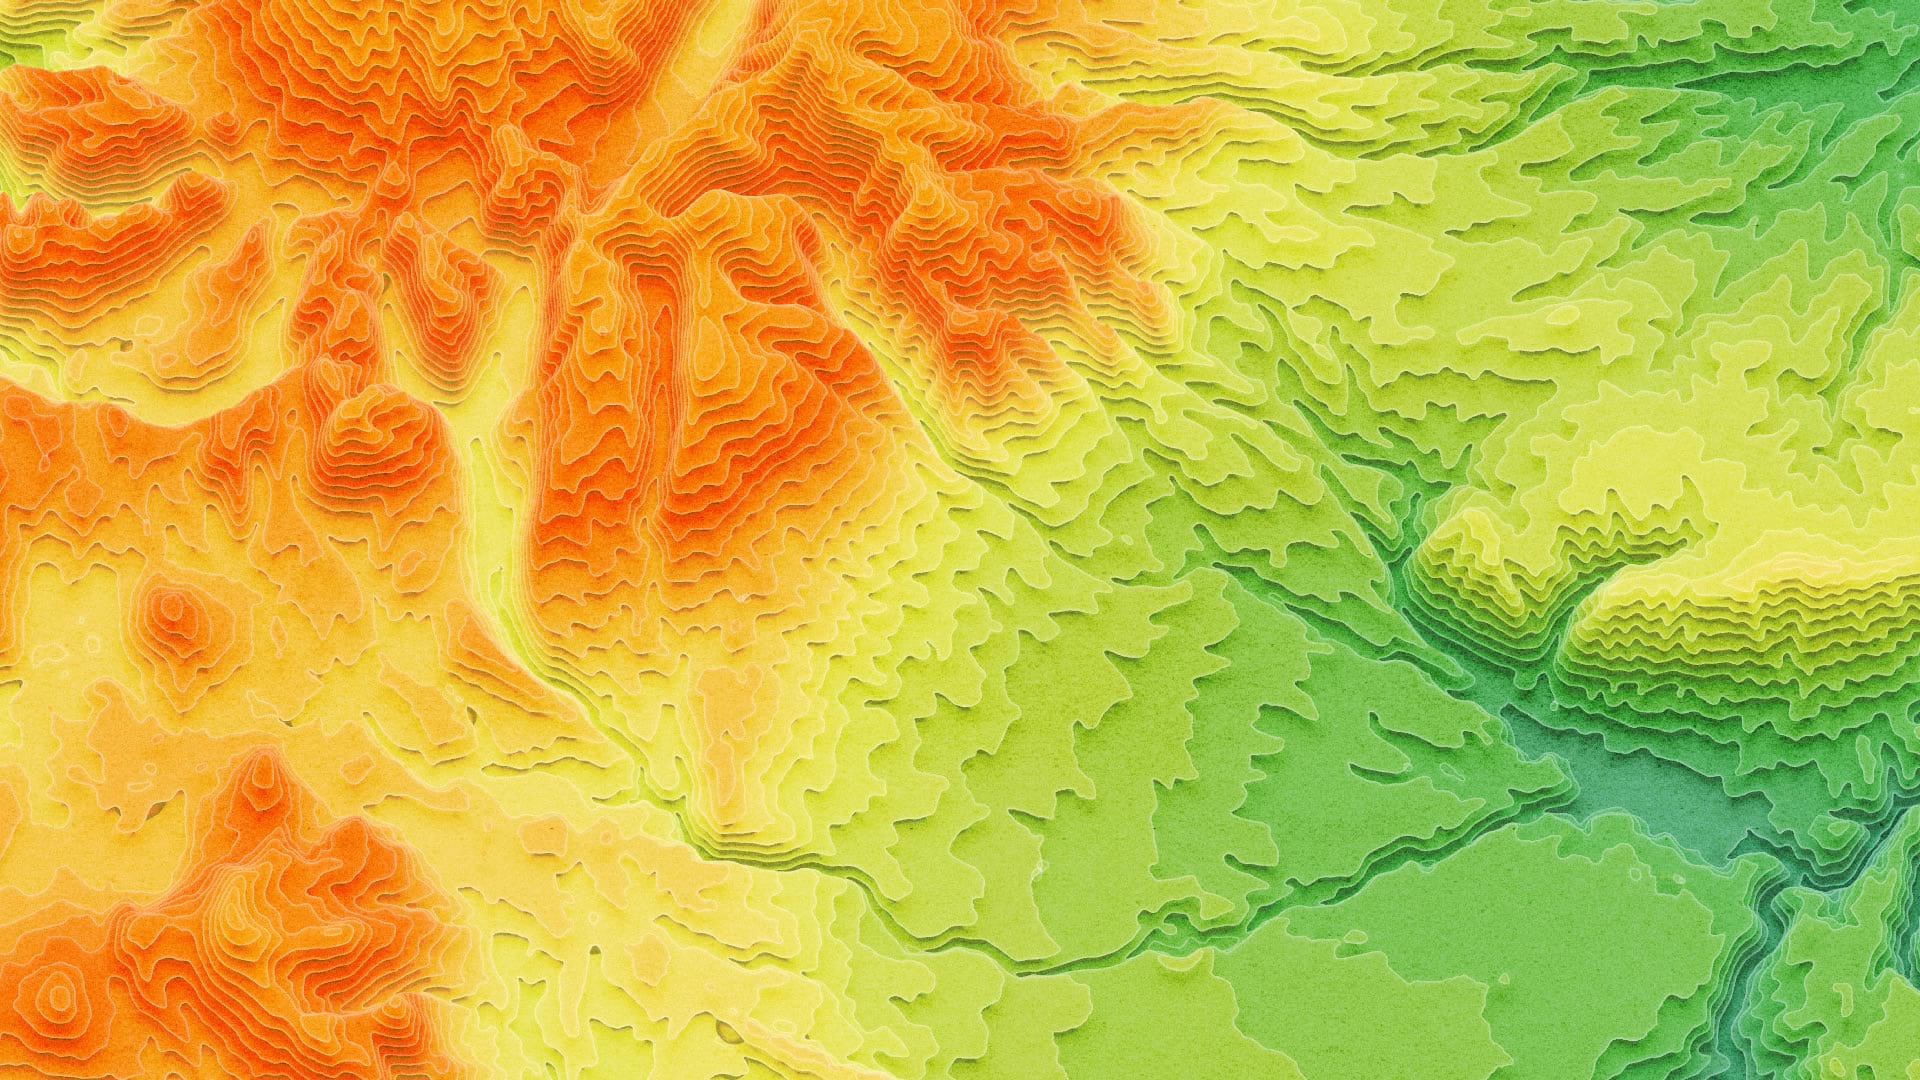 Isometric contours in ArcGIS Pro. Click to embiggen.